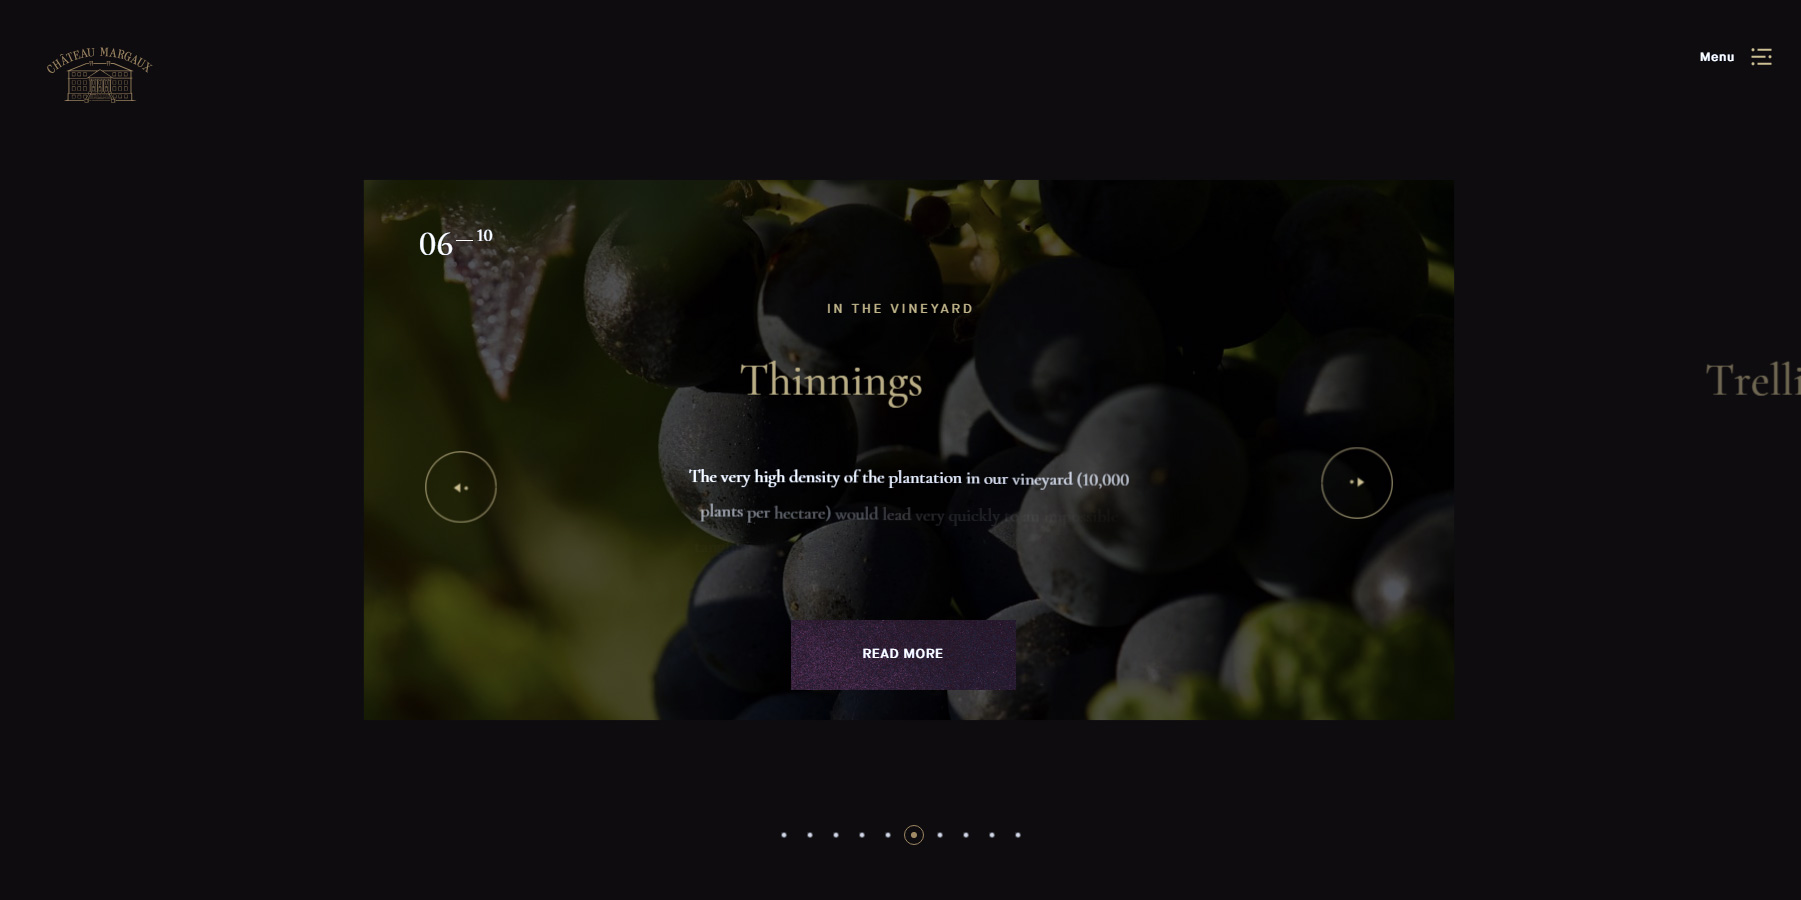 Chateau Margaux - Website of the Day